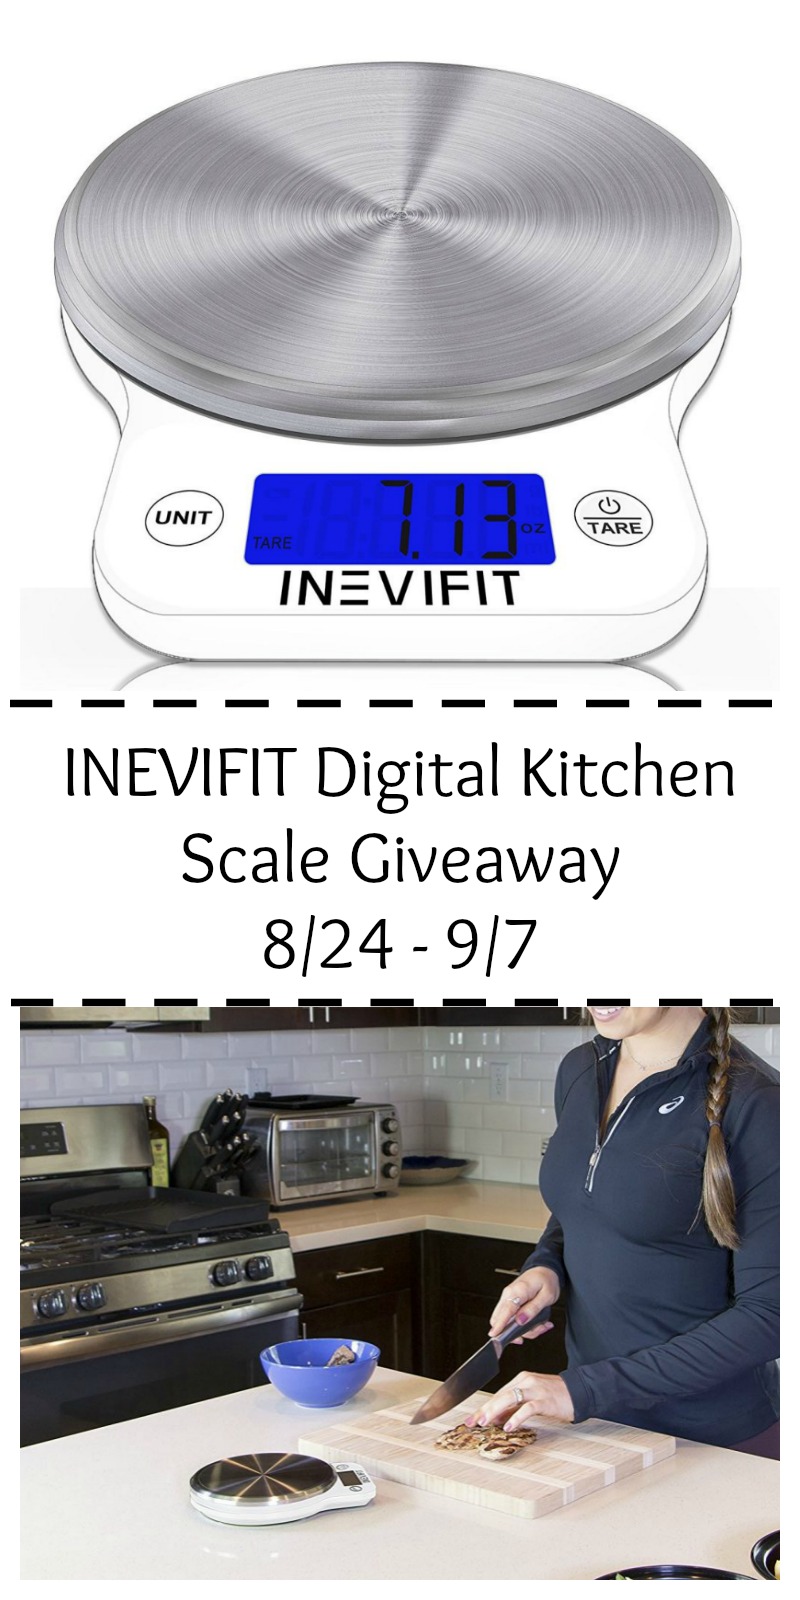 INEVIFIT Kitchen Scale Giveaway (2 winners) Ends 9/7 #BTSEssentials